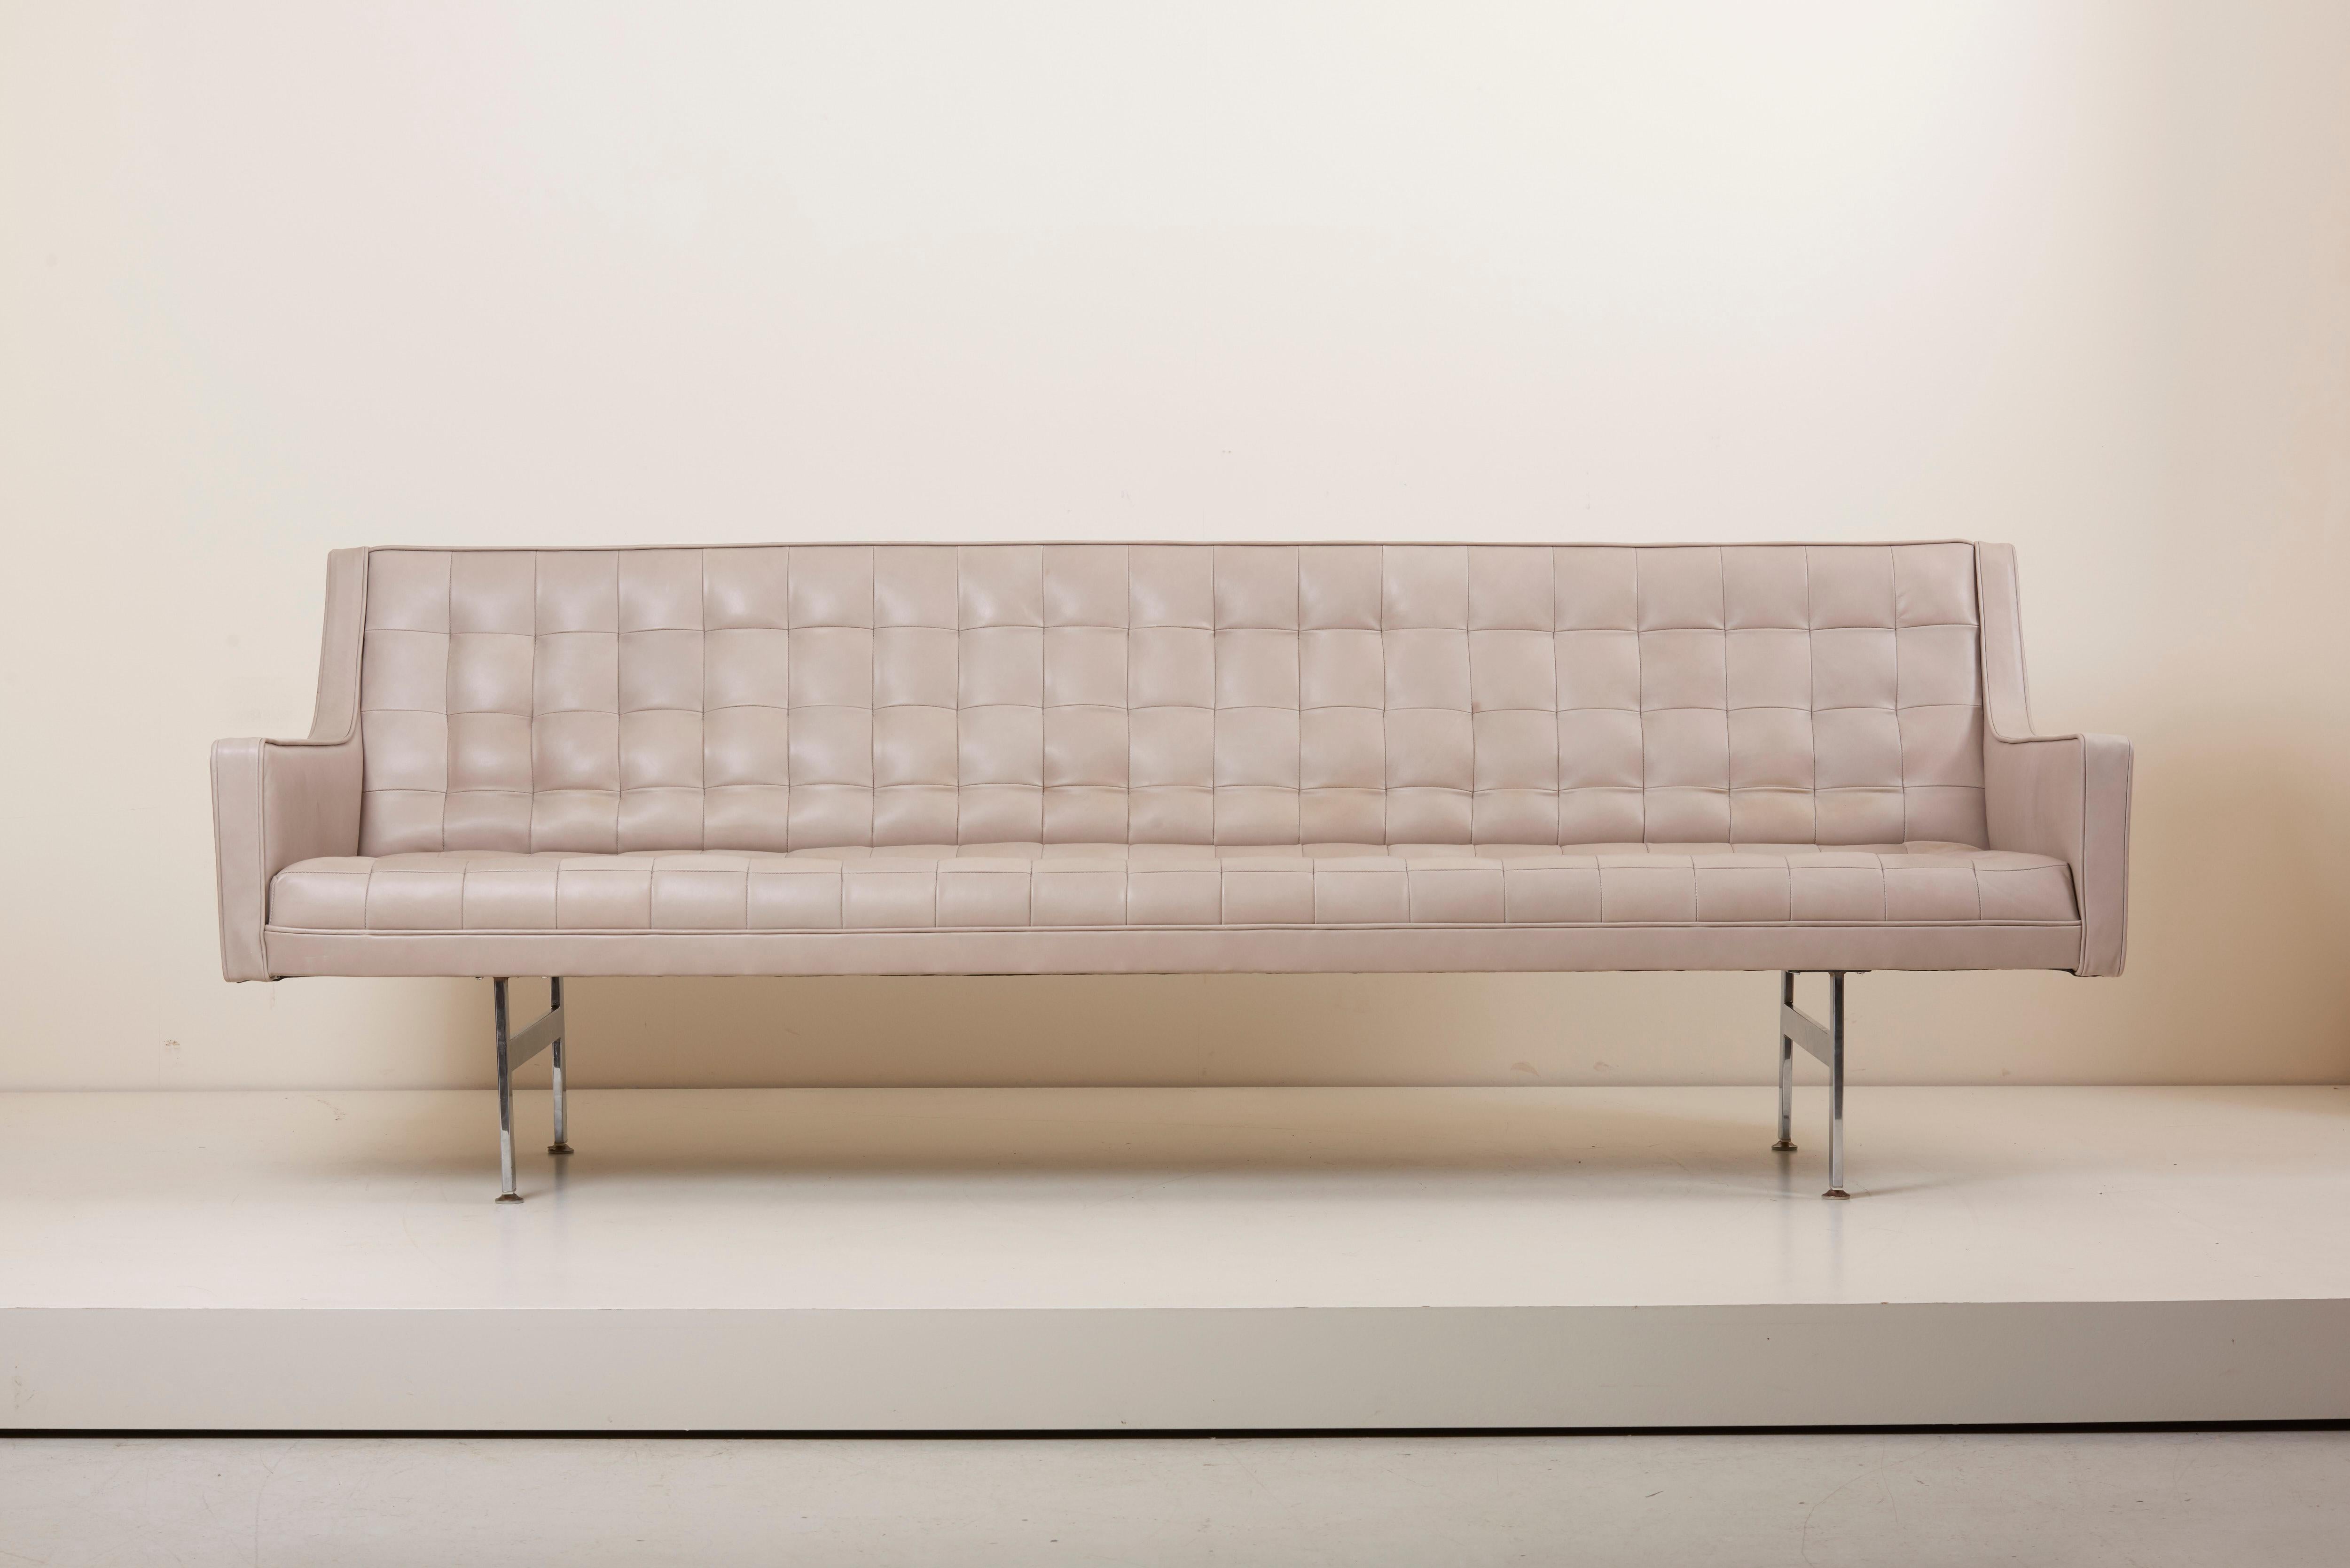 Milo Baughman for Thayer Coggin tufted sofa. New upholstered in grey leather with chrome legs.